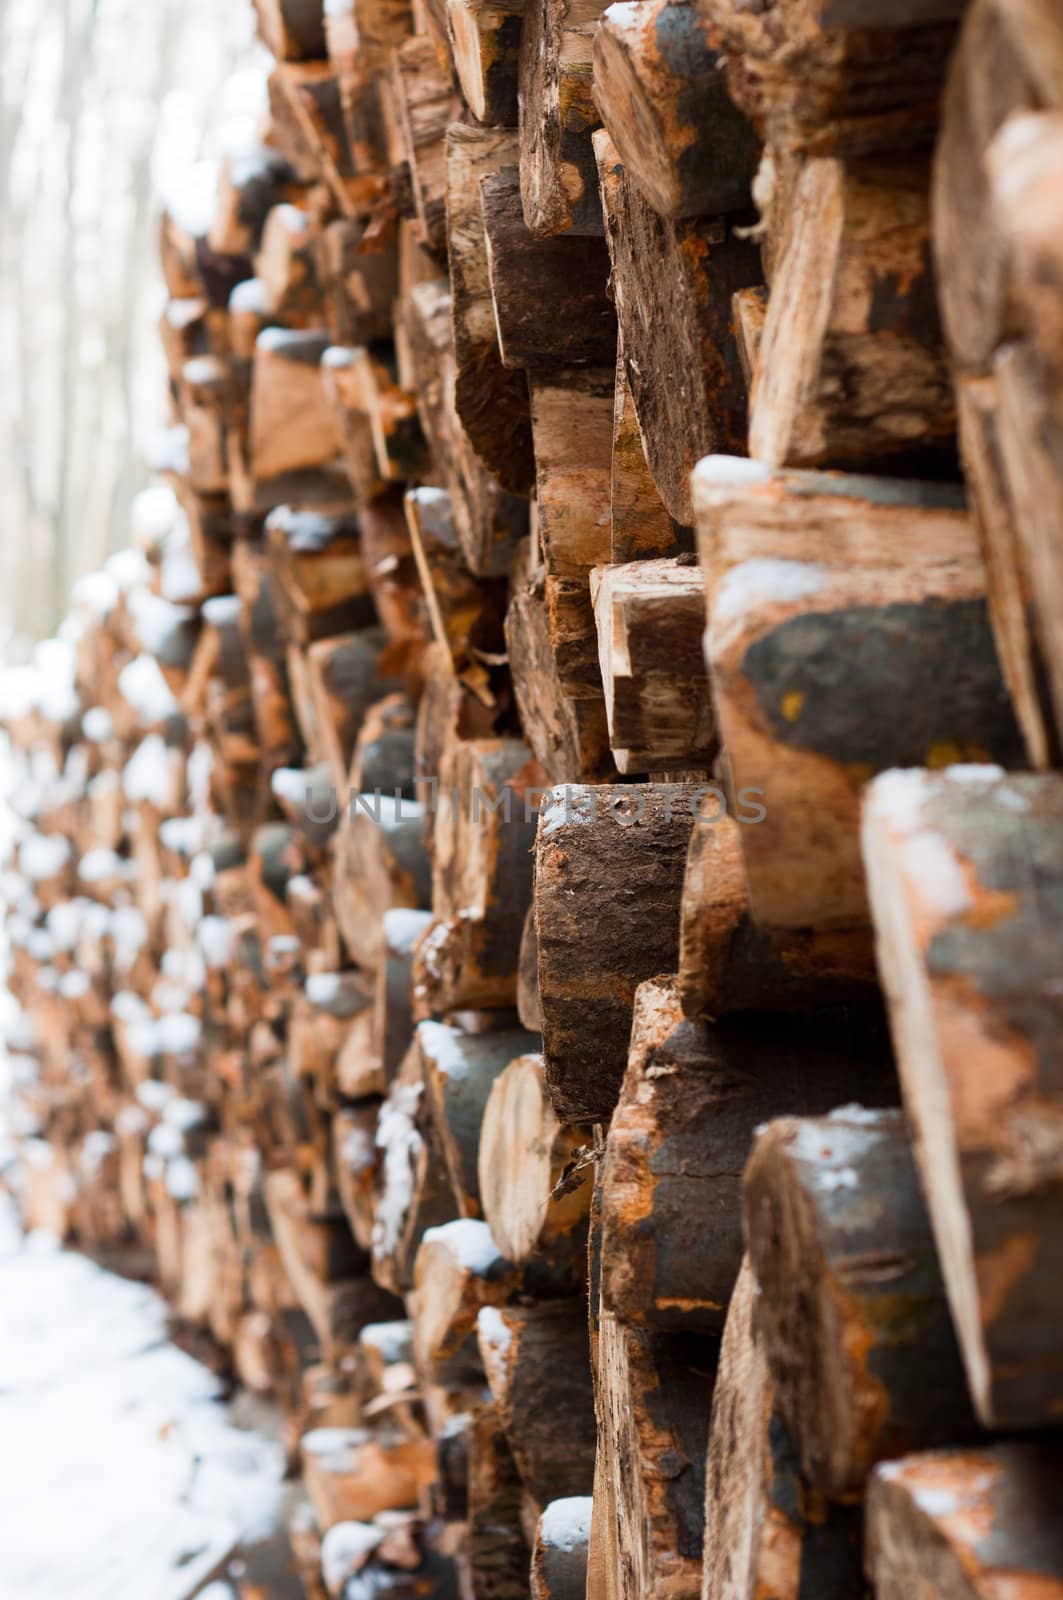 Logs of wood piled up with snow on them